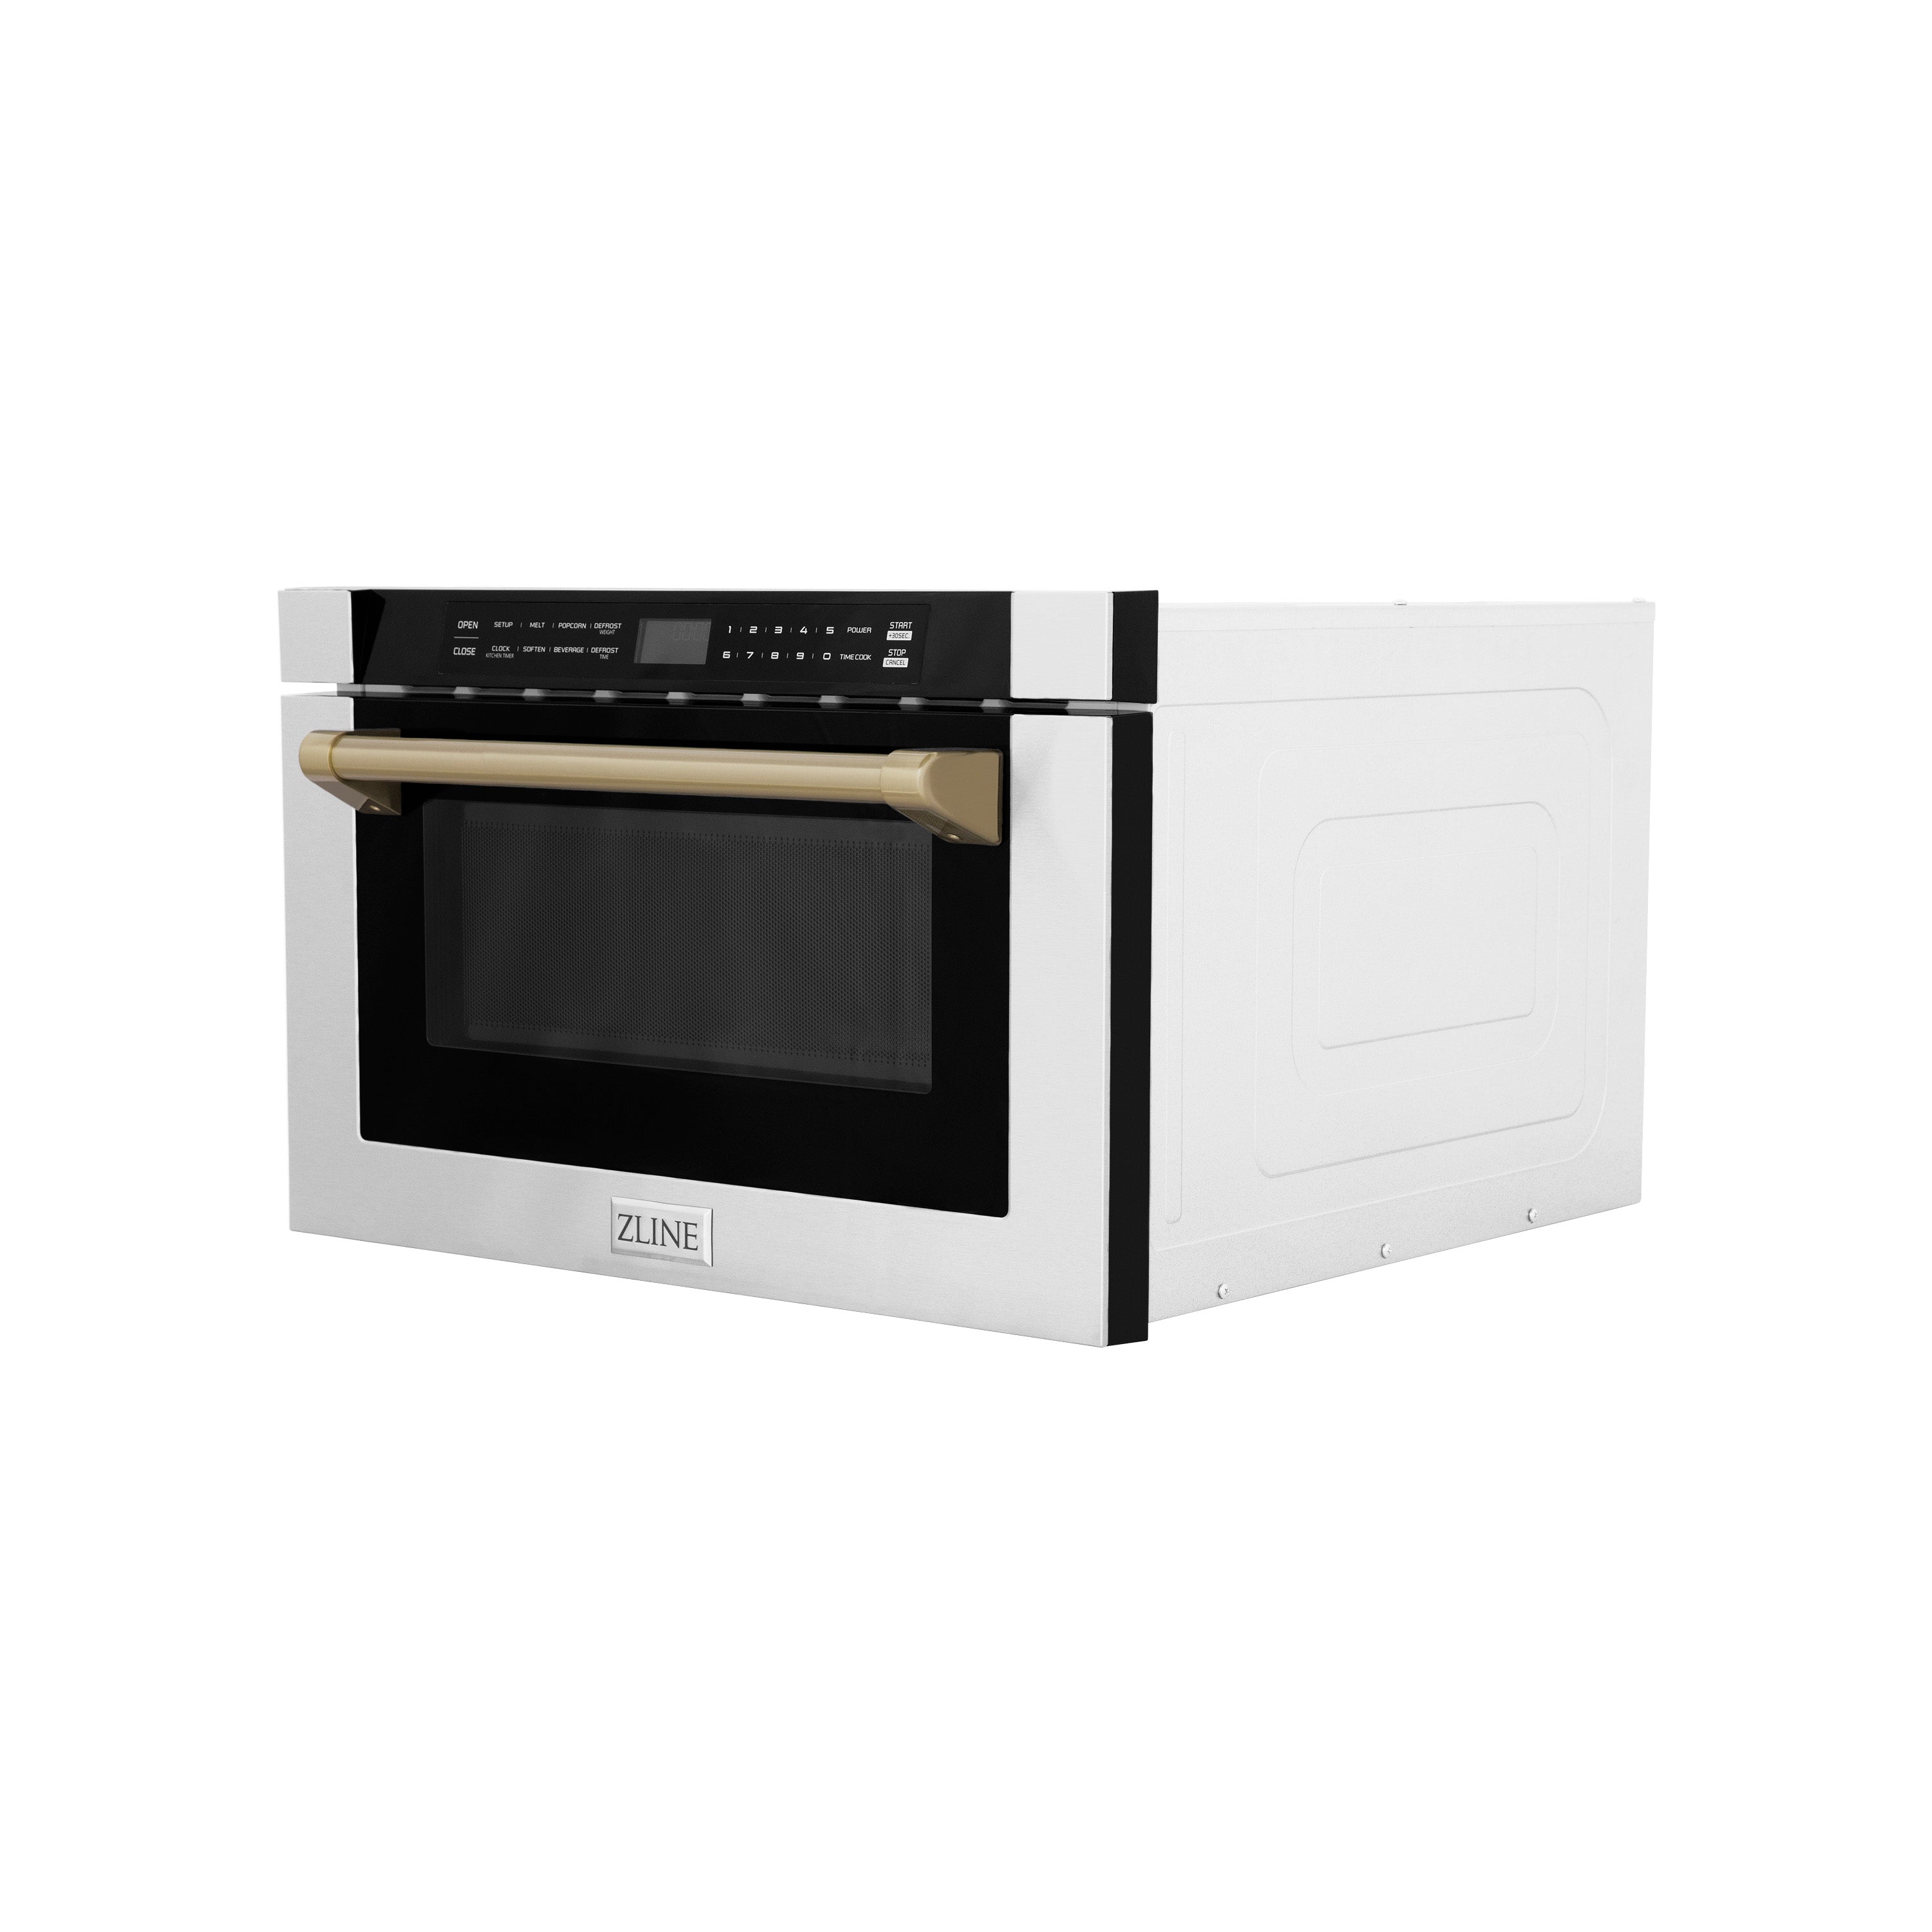 ZLINE Autograph Edition 24 in. 1.2 cu. ft. Built-in Microwave Drawer with a Traditional Handle in Stainless Steel and Champagne Bronze Accents (MWDZ-1-H-CB) Side View Drawer Closed